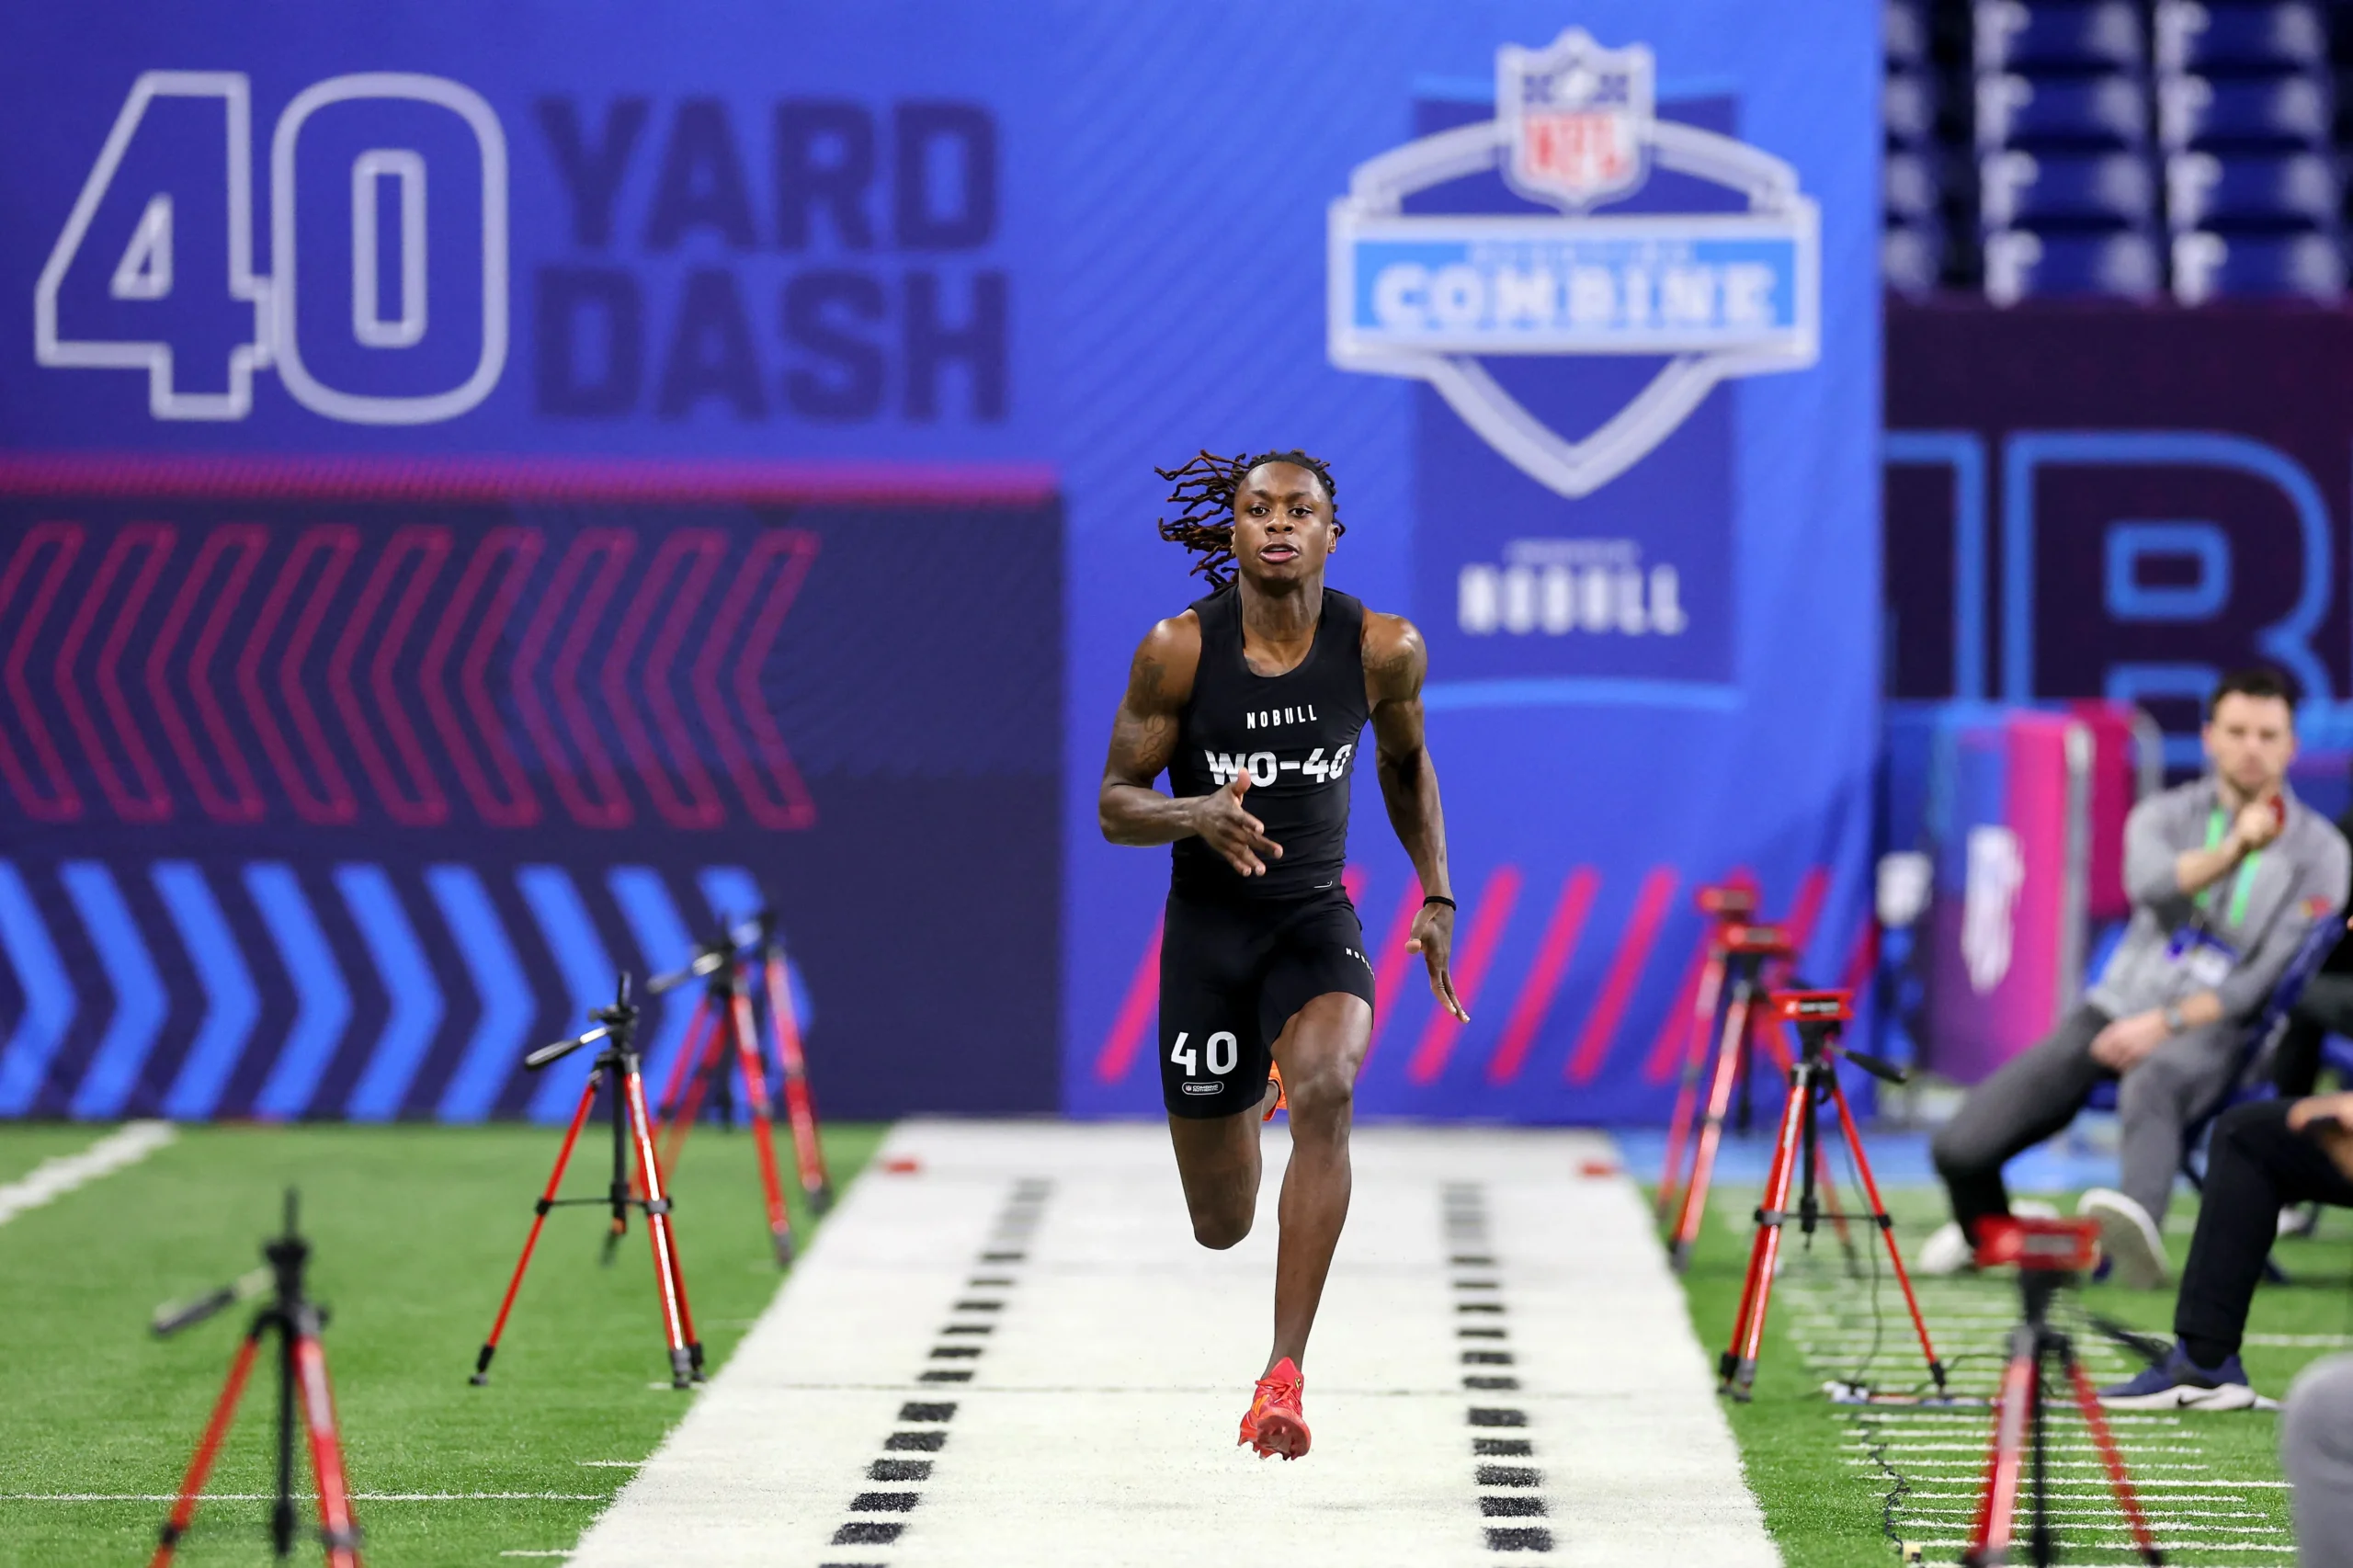 Is scoring a strong time in the 40-yard dash an indicator of greatness?